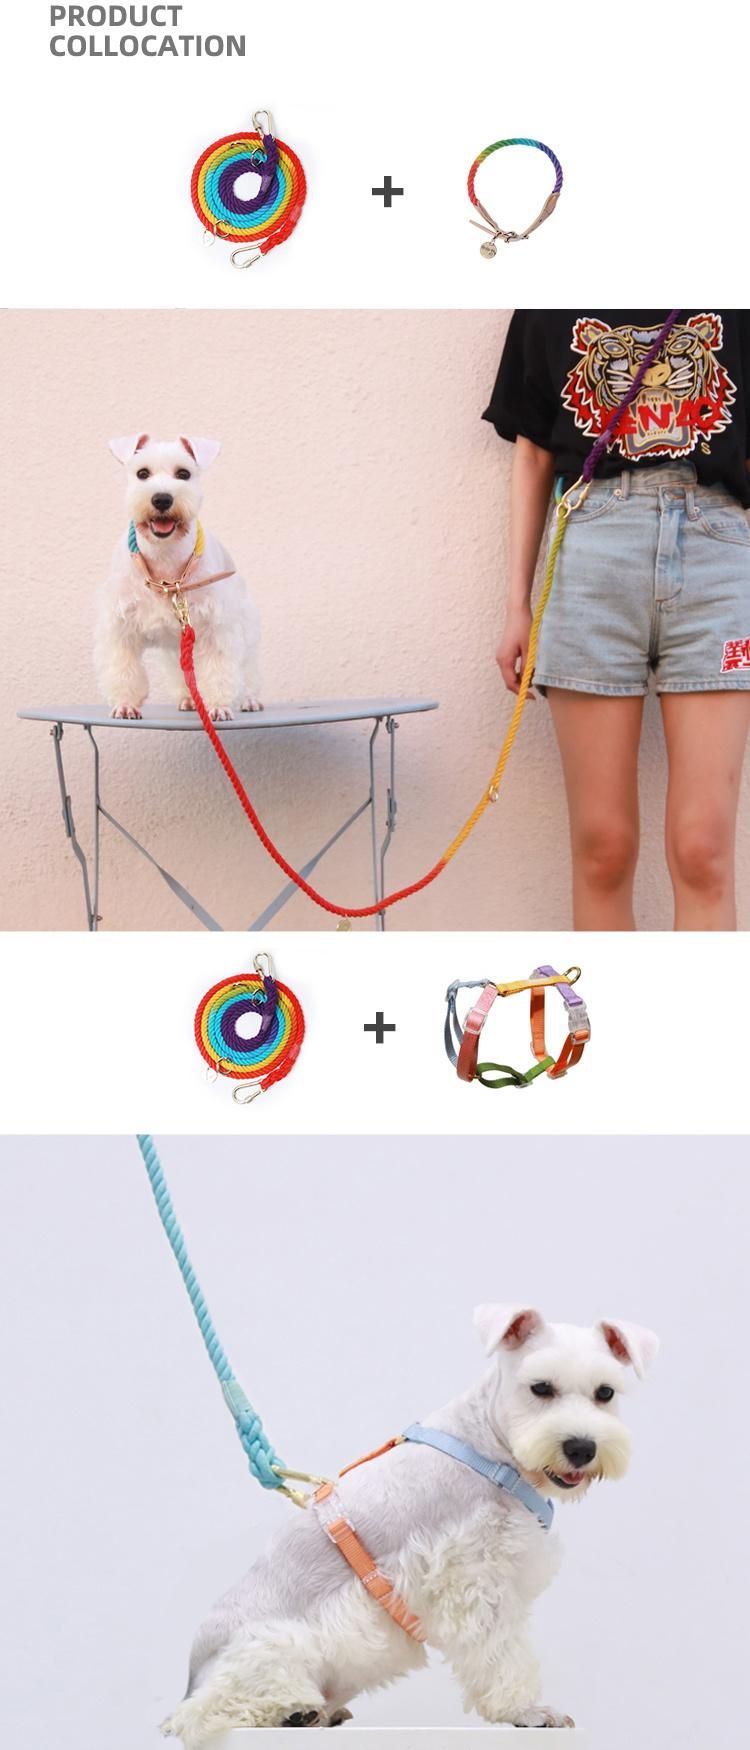 Pet Supplies Quick Release No Pull Luxury Dog Harness Personalized Pastel Full Size Dog Harness for Puppy Medium Large Dog